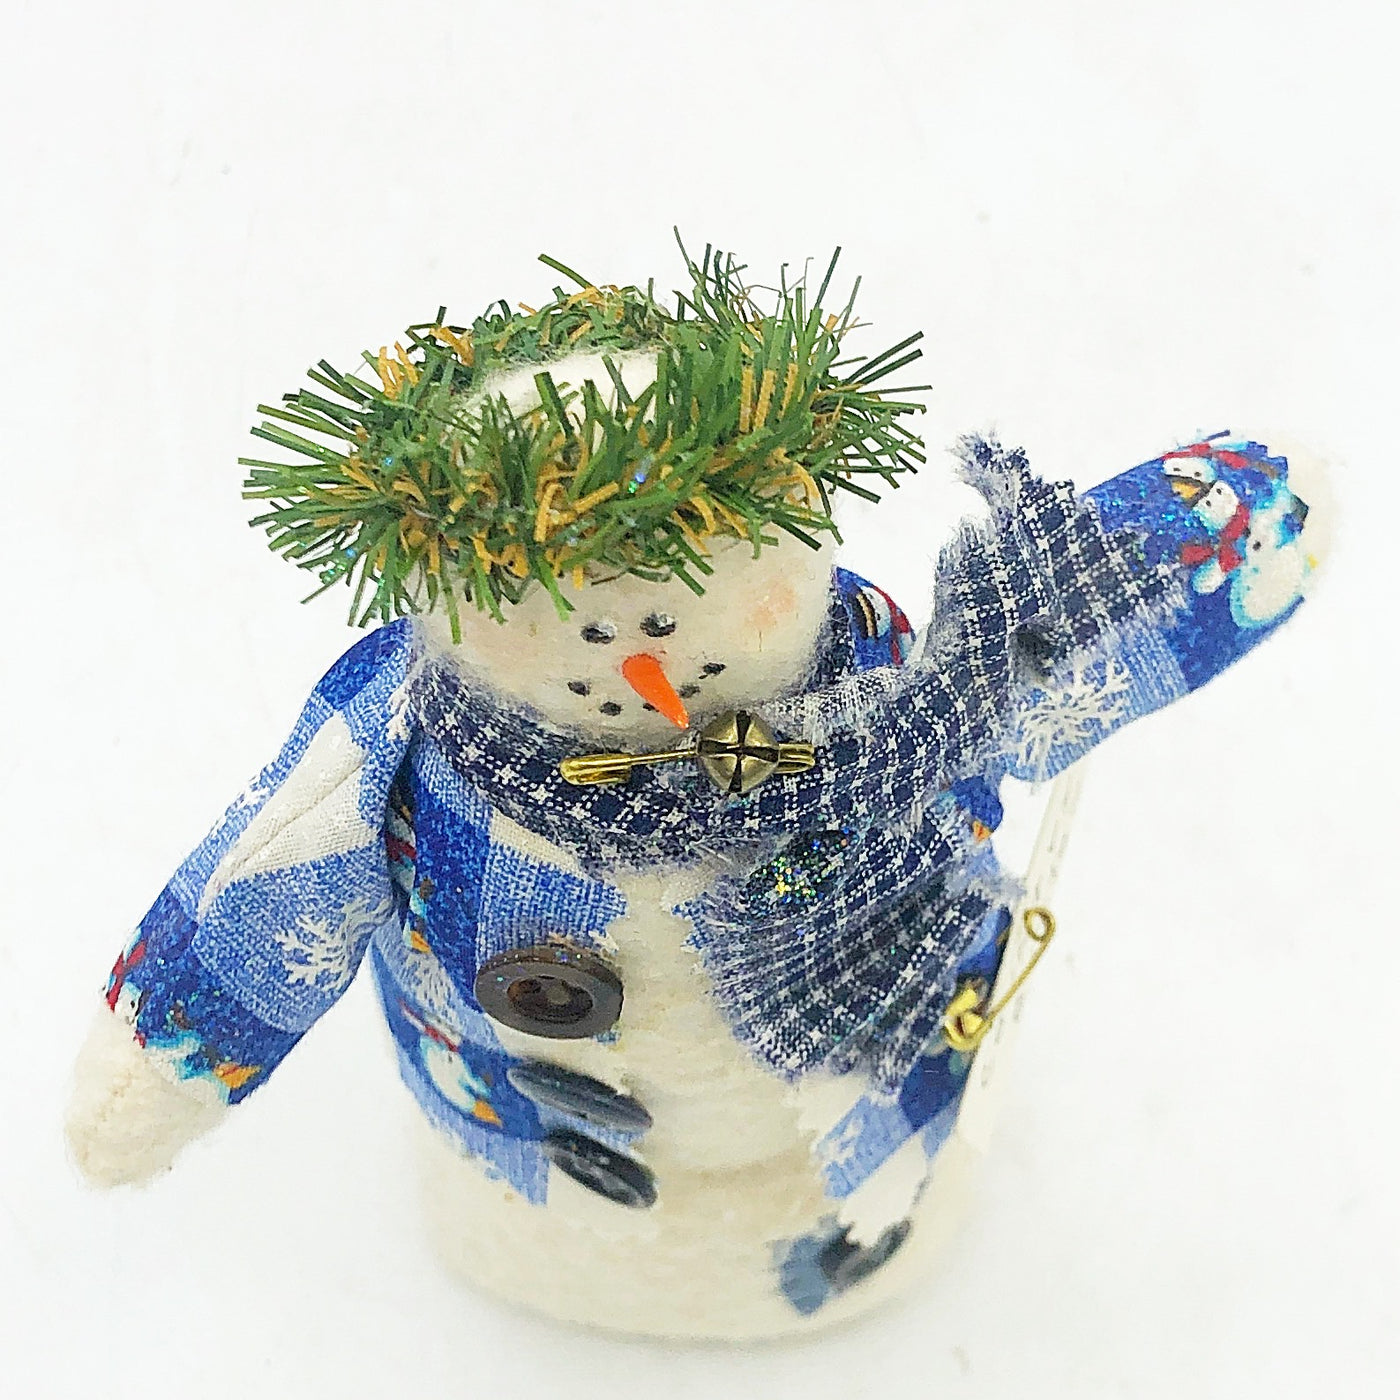 💙 Lil' Country Button Snowman Fabric Figure 7.25" H